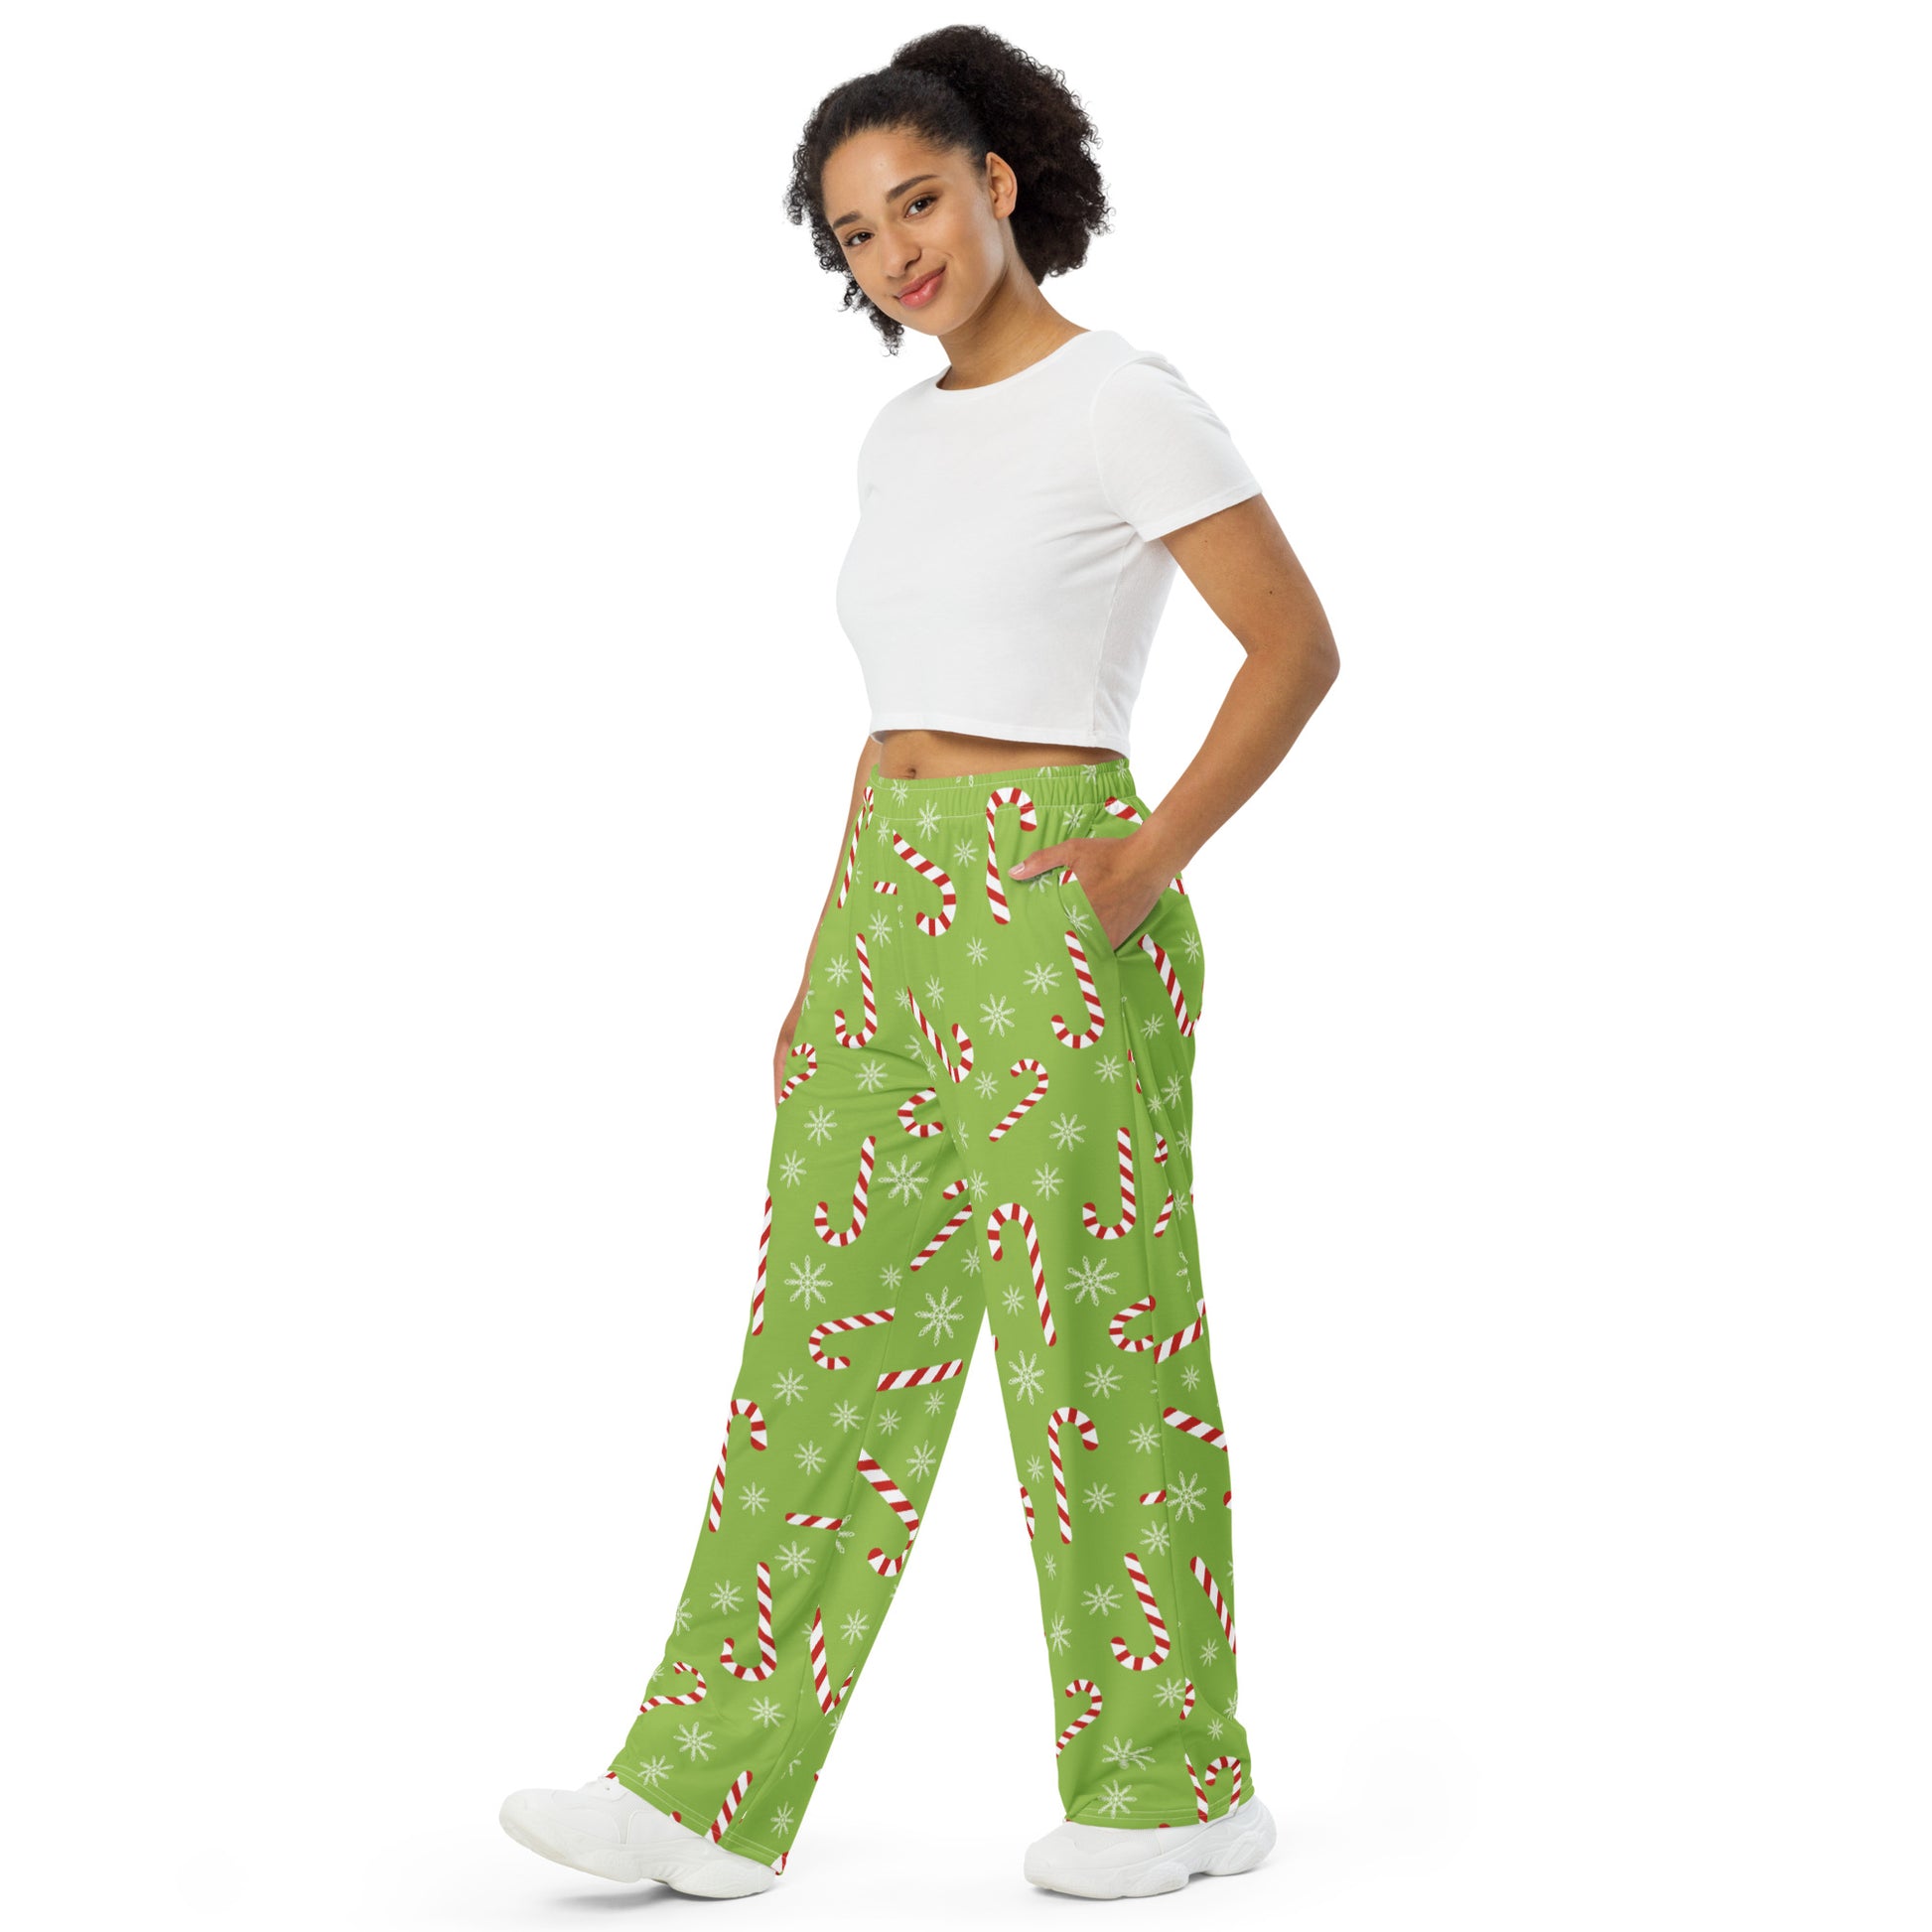 Candy Cane Lounge Pants with Pockets, Holiday Christmas Unisex Men